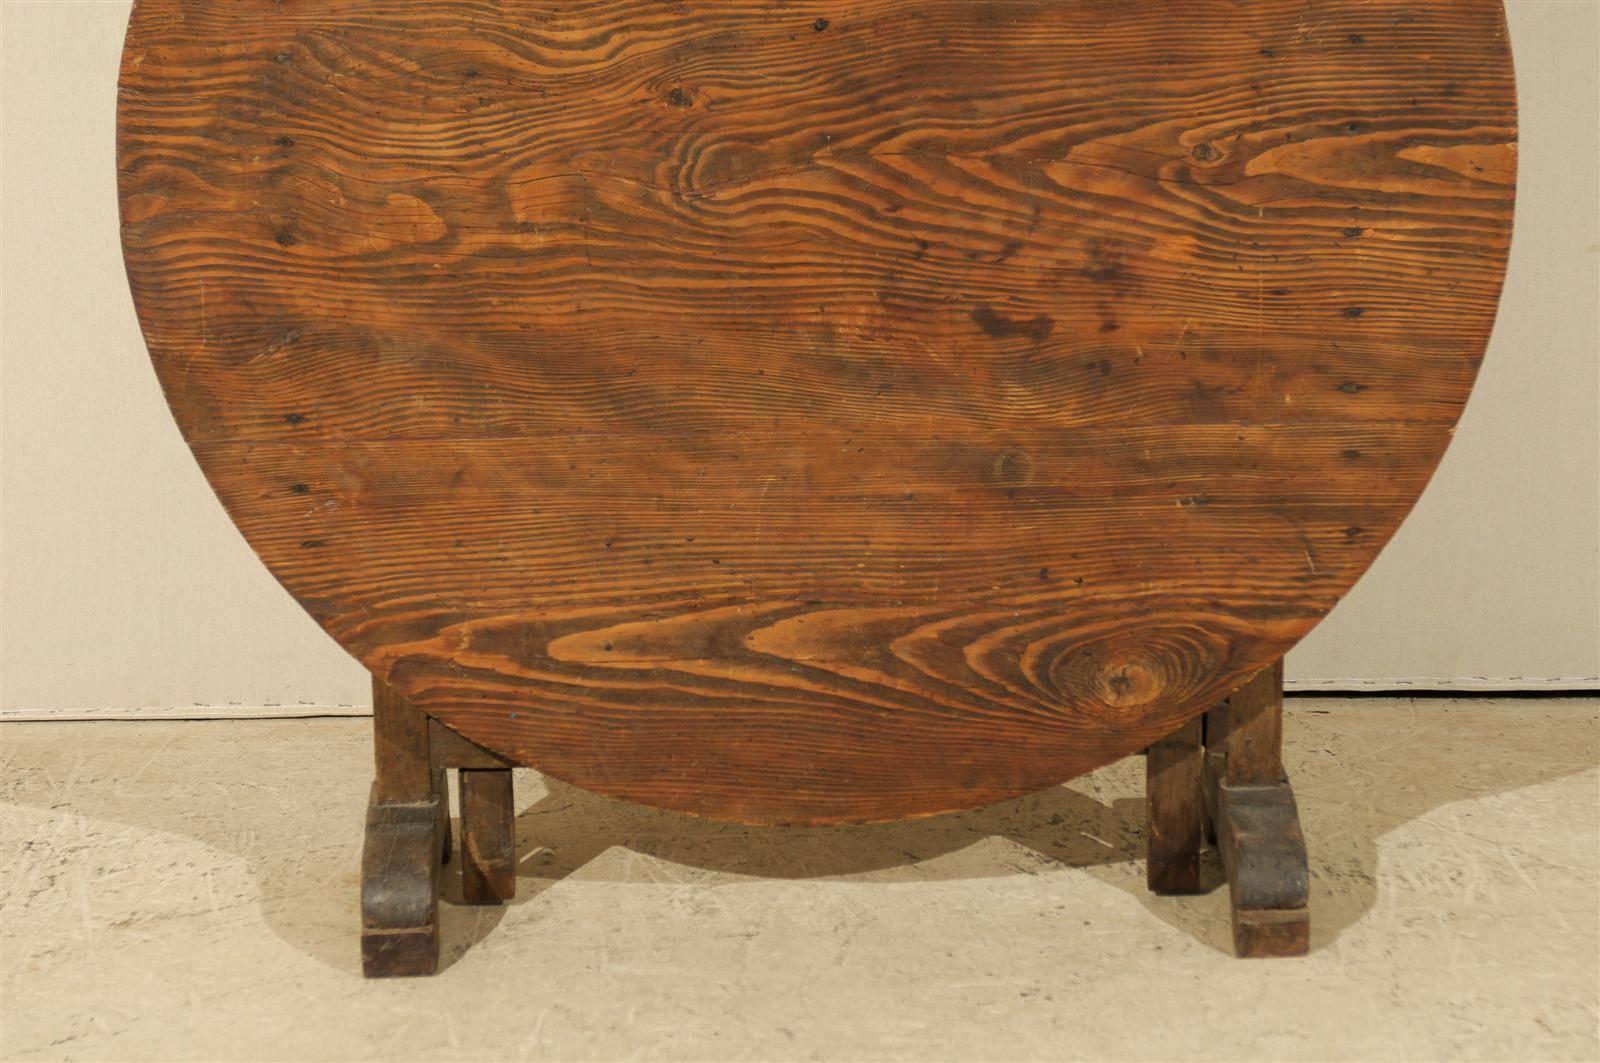 20th Century A French Wine Tasting Table of Medium Size with Nice Wood Grain and Round Shape